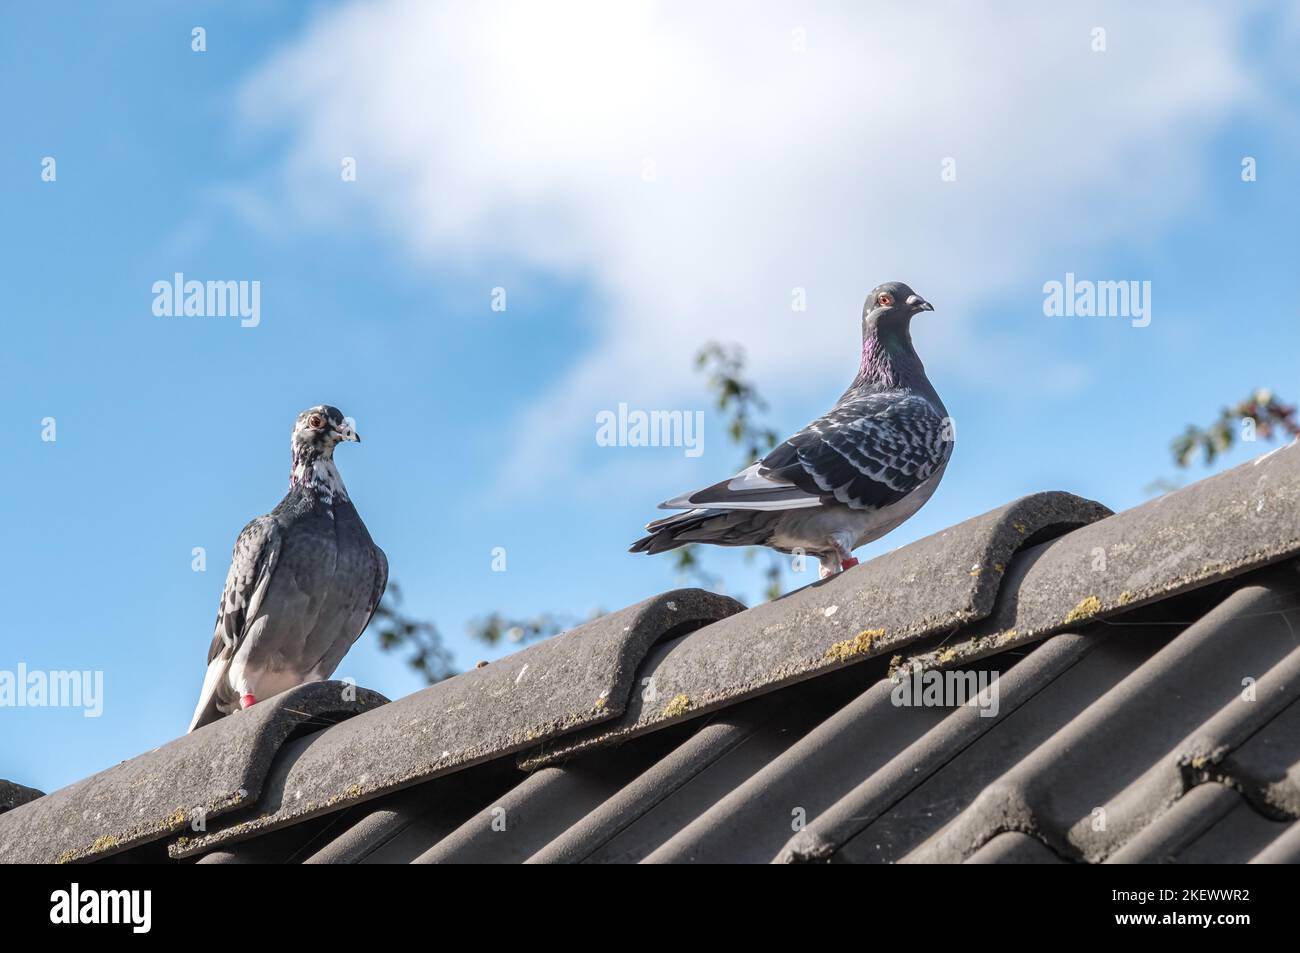 A couple of homing pigeons walk on the ridge of a roof Stock Photo